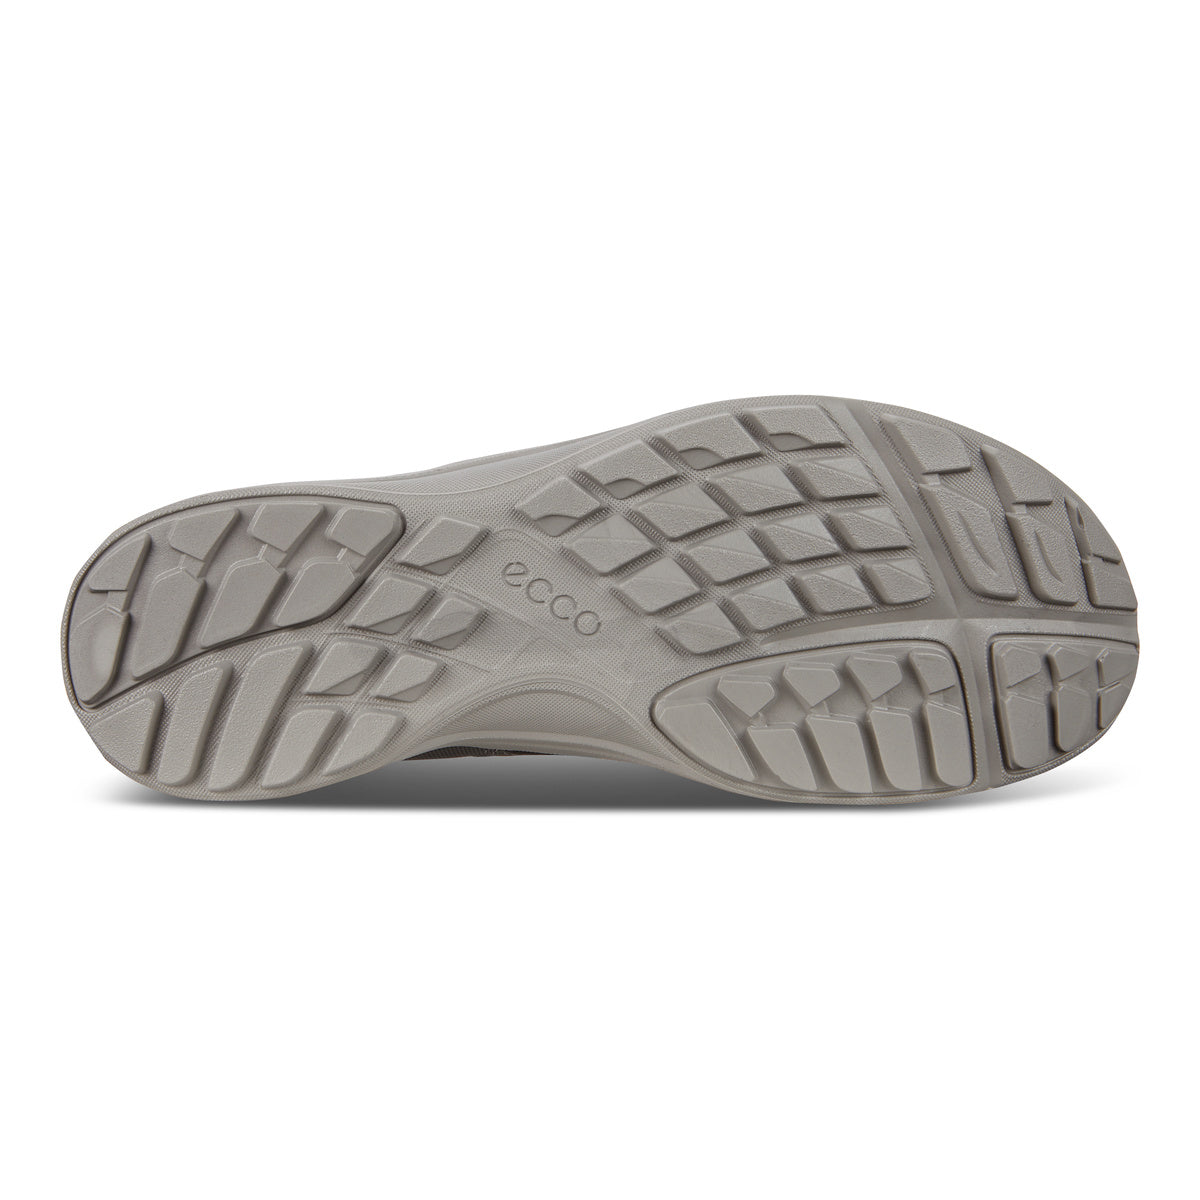 Ecco Terracruise LT 825774 56586 Mens Shadow Grey Textile Arch Support Elasticated Shoes